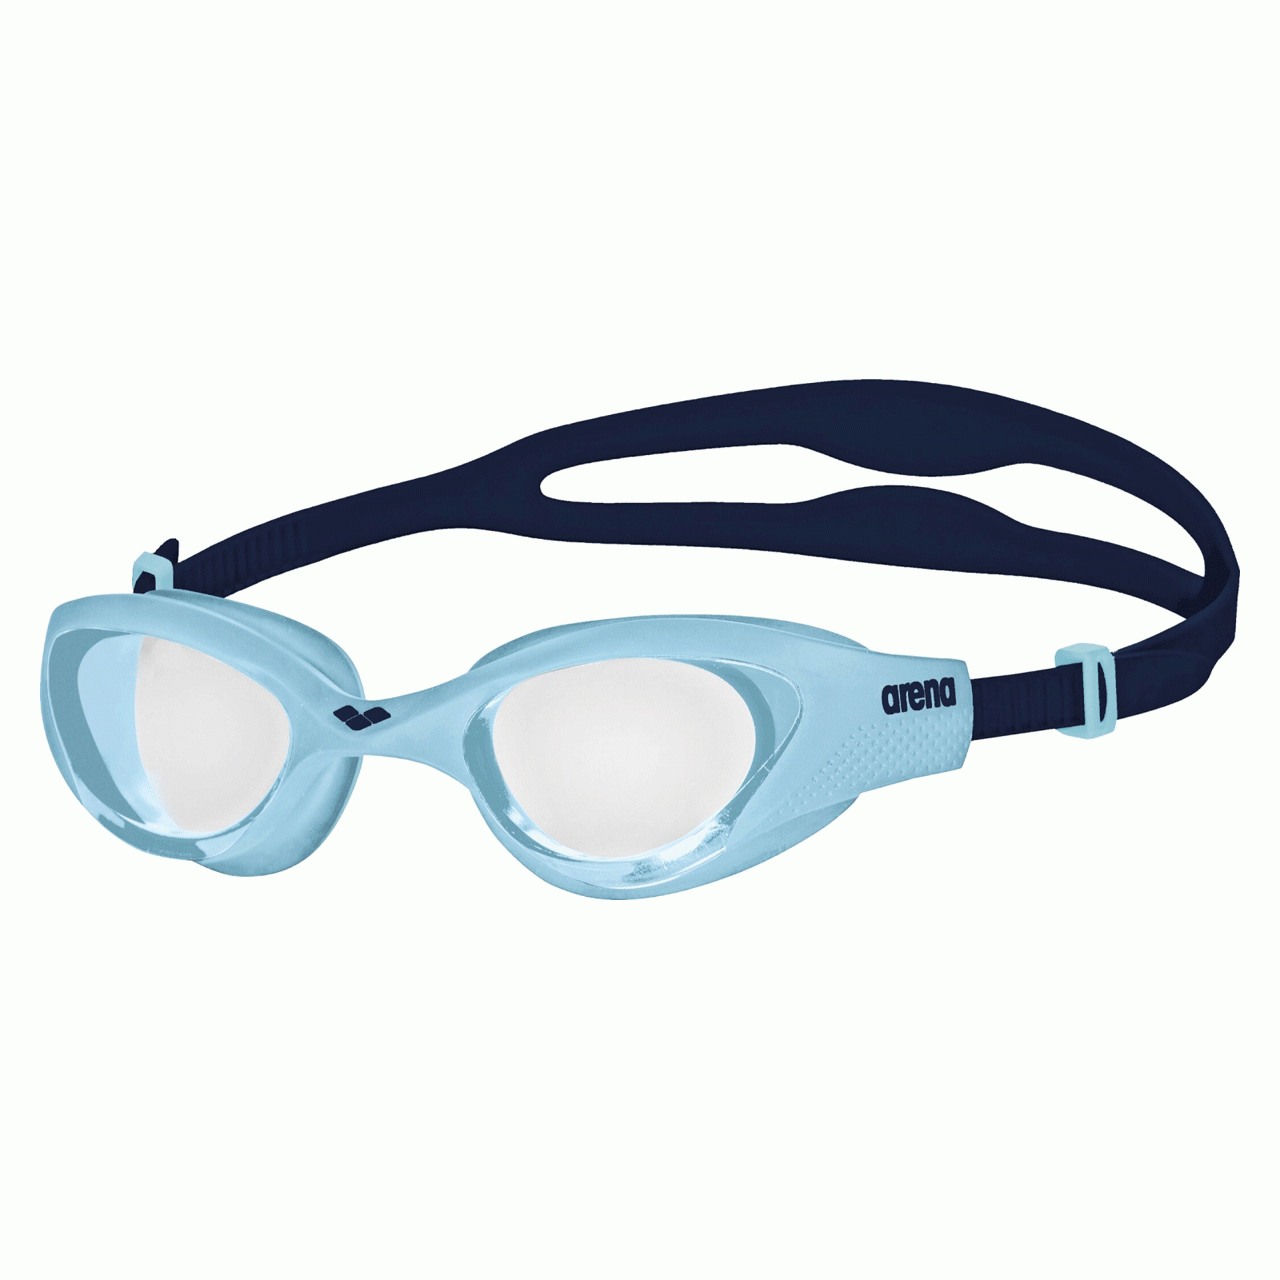 Kinder Schwimmbrille The One 